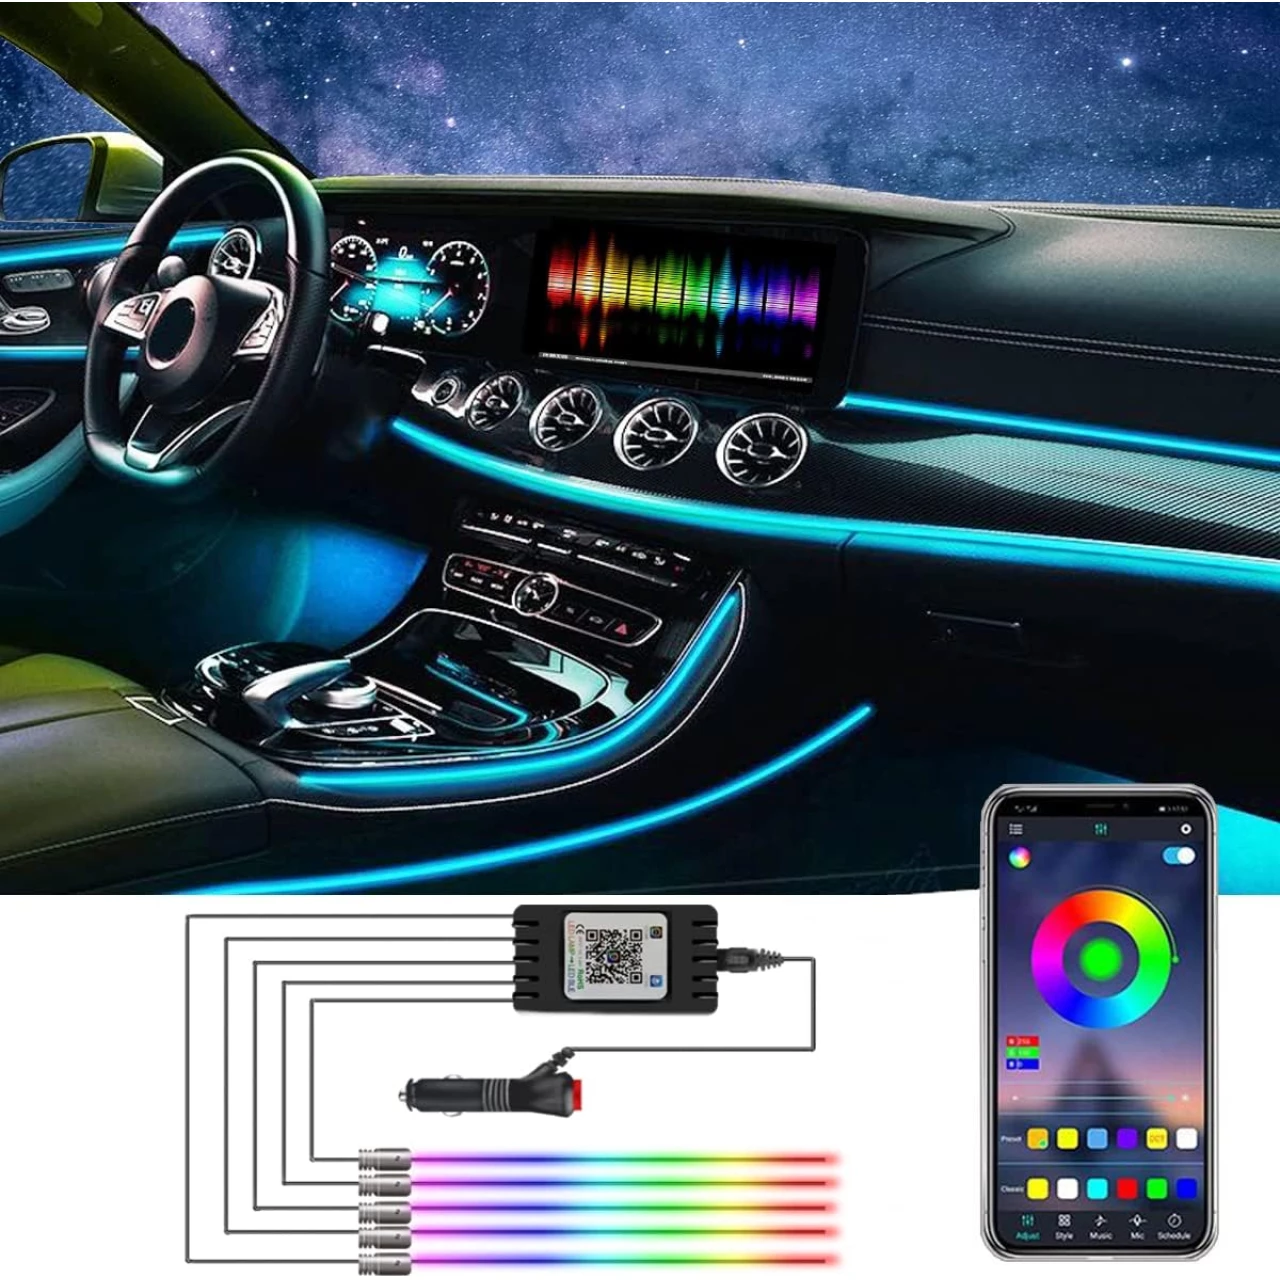 Car LED Strip Light, RGB Interior Car Lights, App Control 16 Million Color,5 in 1 with 236.22 inches Fiber Optic, Multi-Color Ambient Lighting Kits, Music Sync Rhythm and DIY Colors Mode